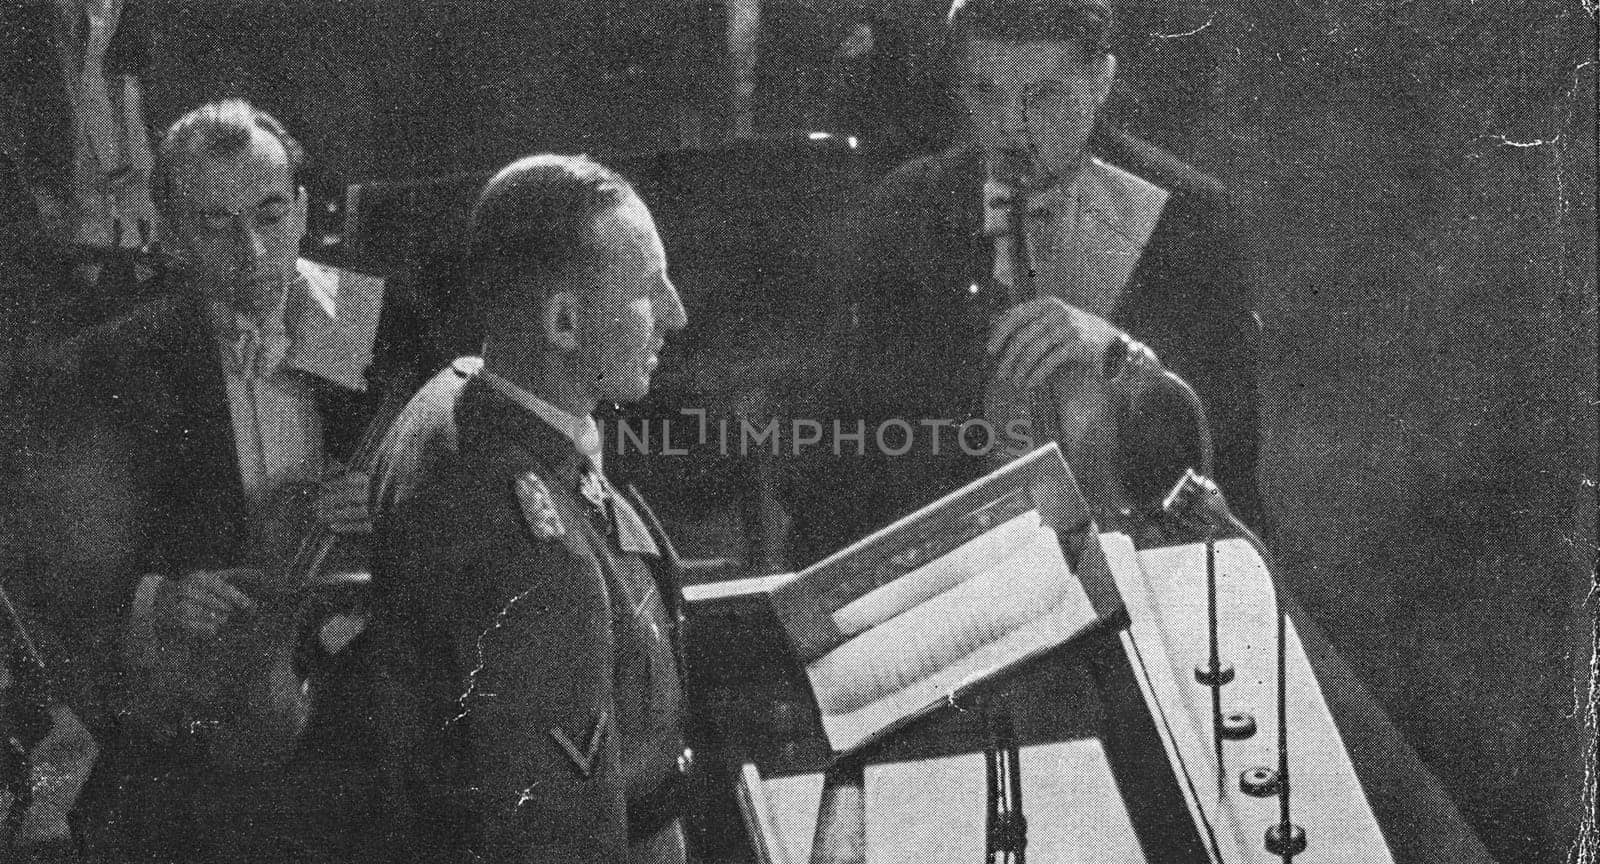 PRAGUE, PROTECTORATE OF BOHEMIA AND MORAVIA - SPRING 1941: Reinhard Heydrich, Deputy Reich Protector of the Protectorate of Bohemia and Moravia, adresses to audience.